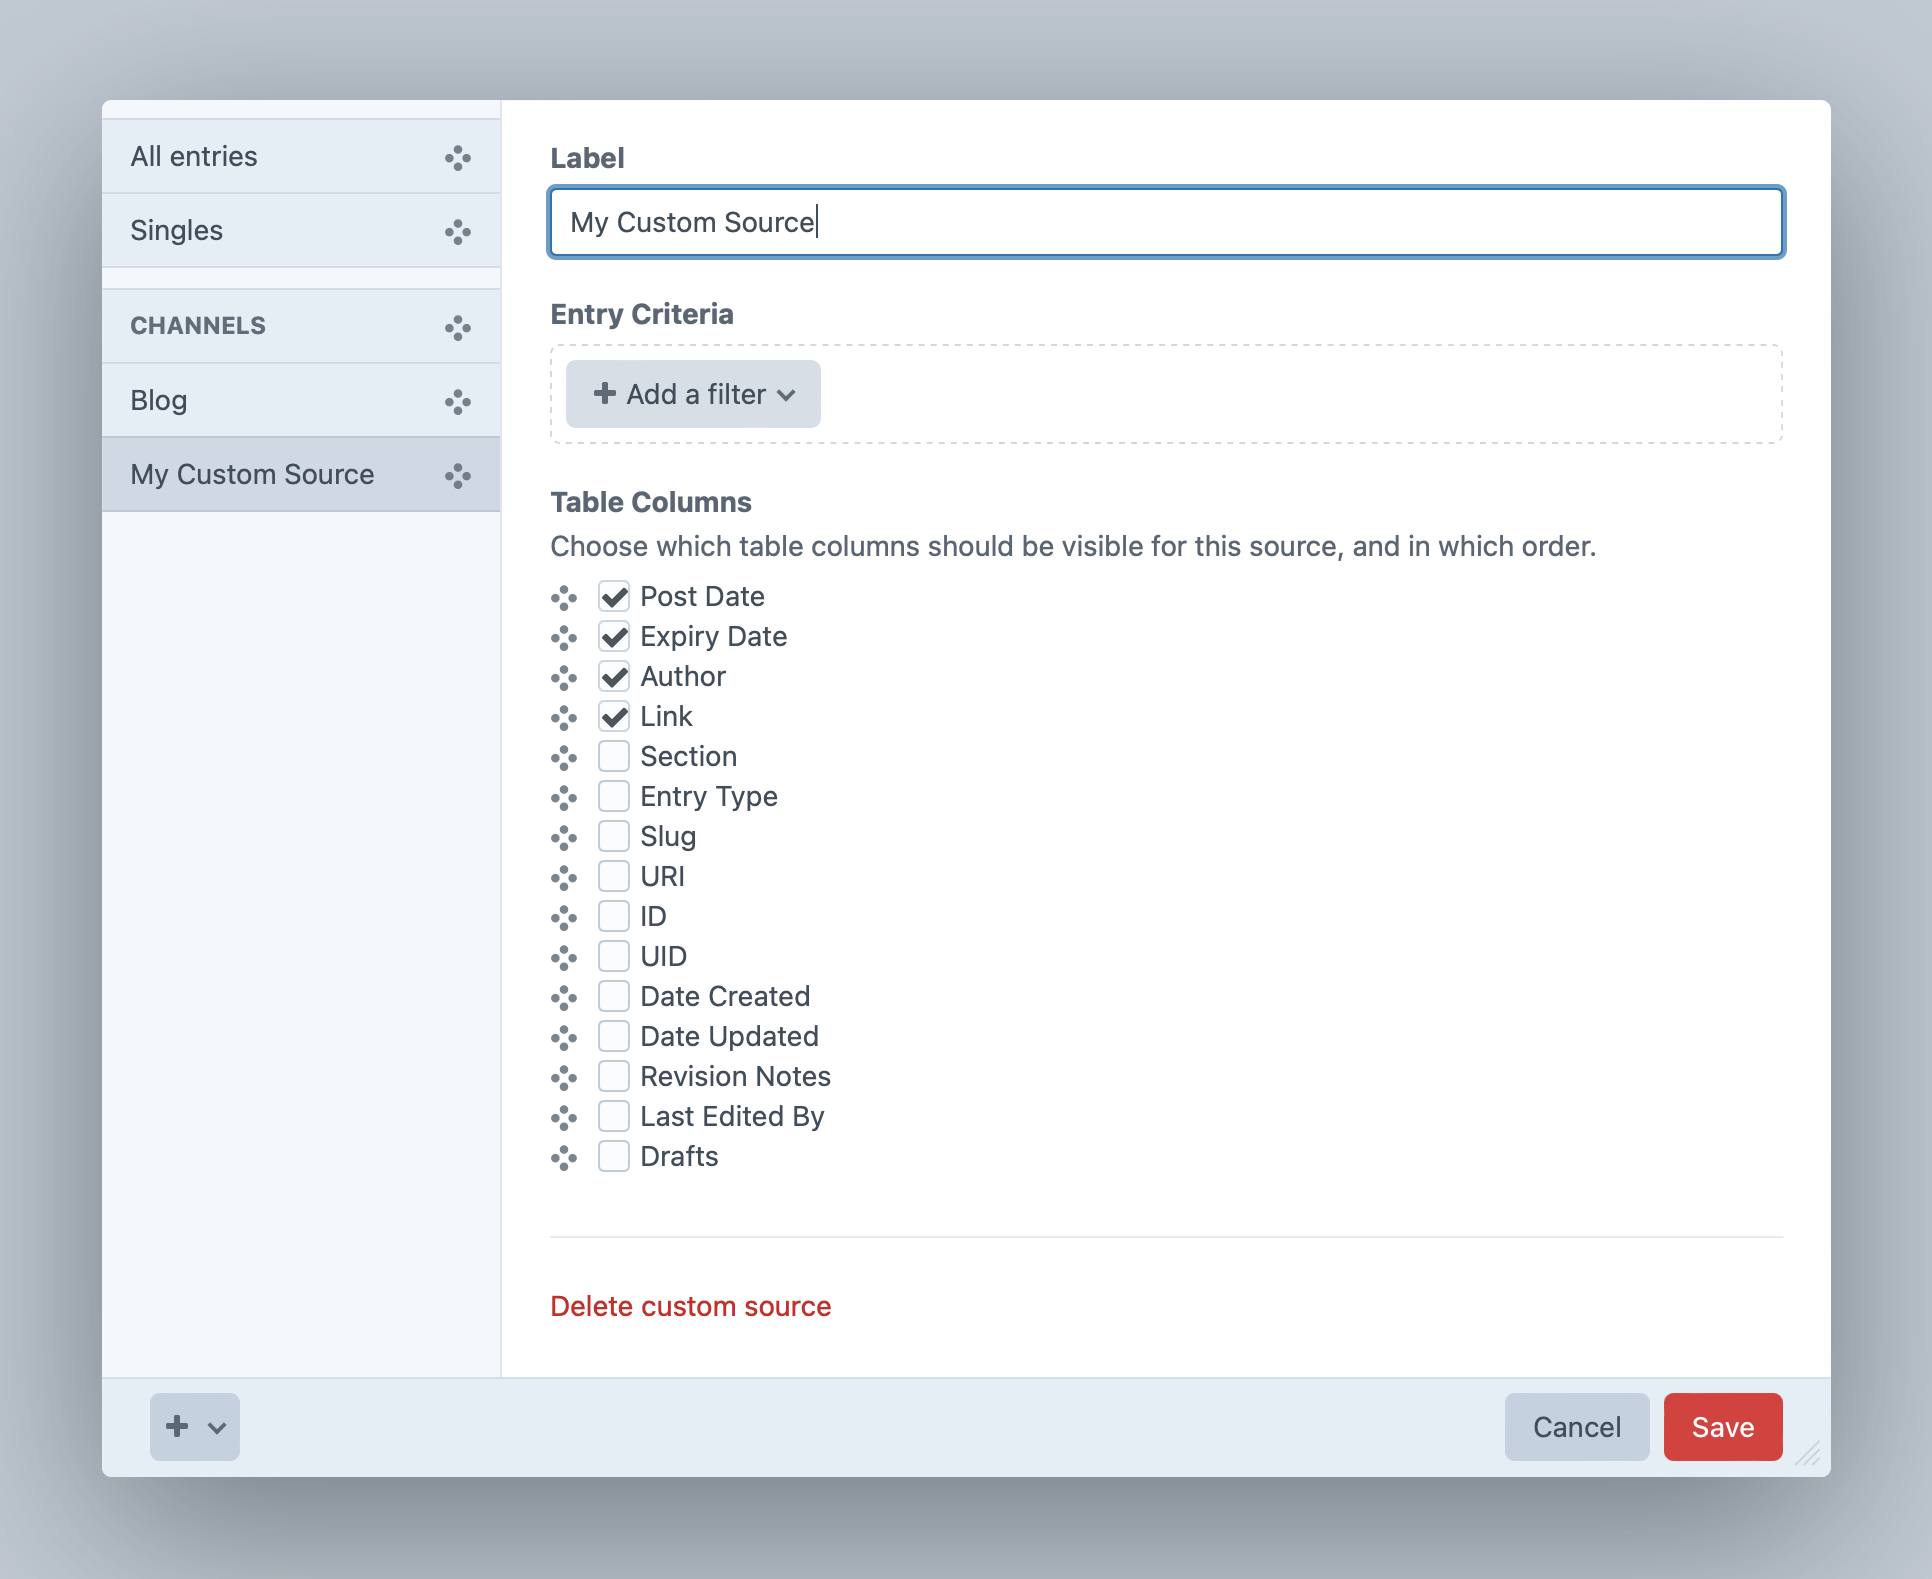 Screenshot of a modal window with fields for a new custom source: Label, Entry Criteria, and Table Columns